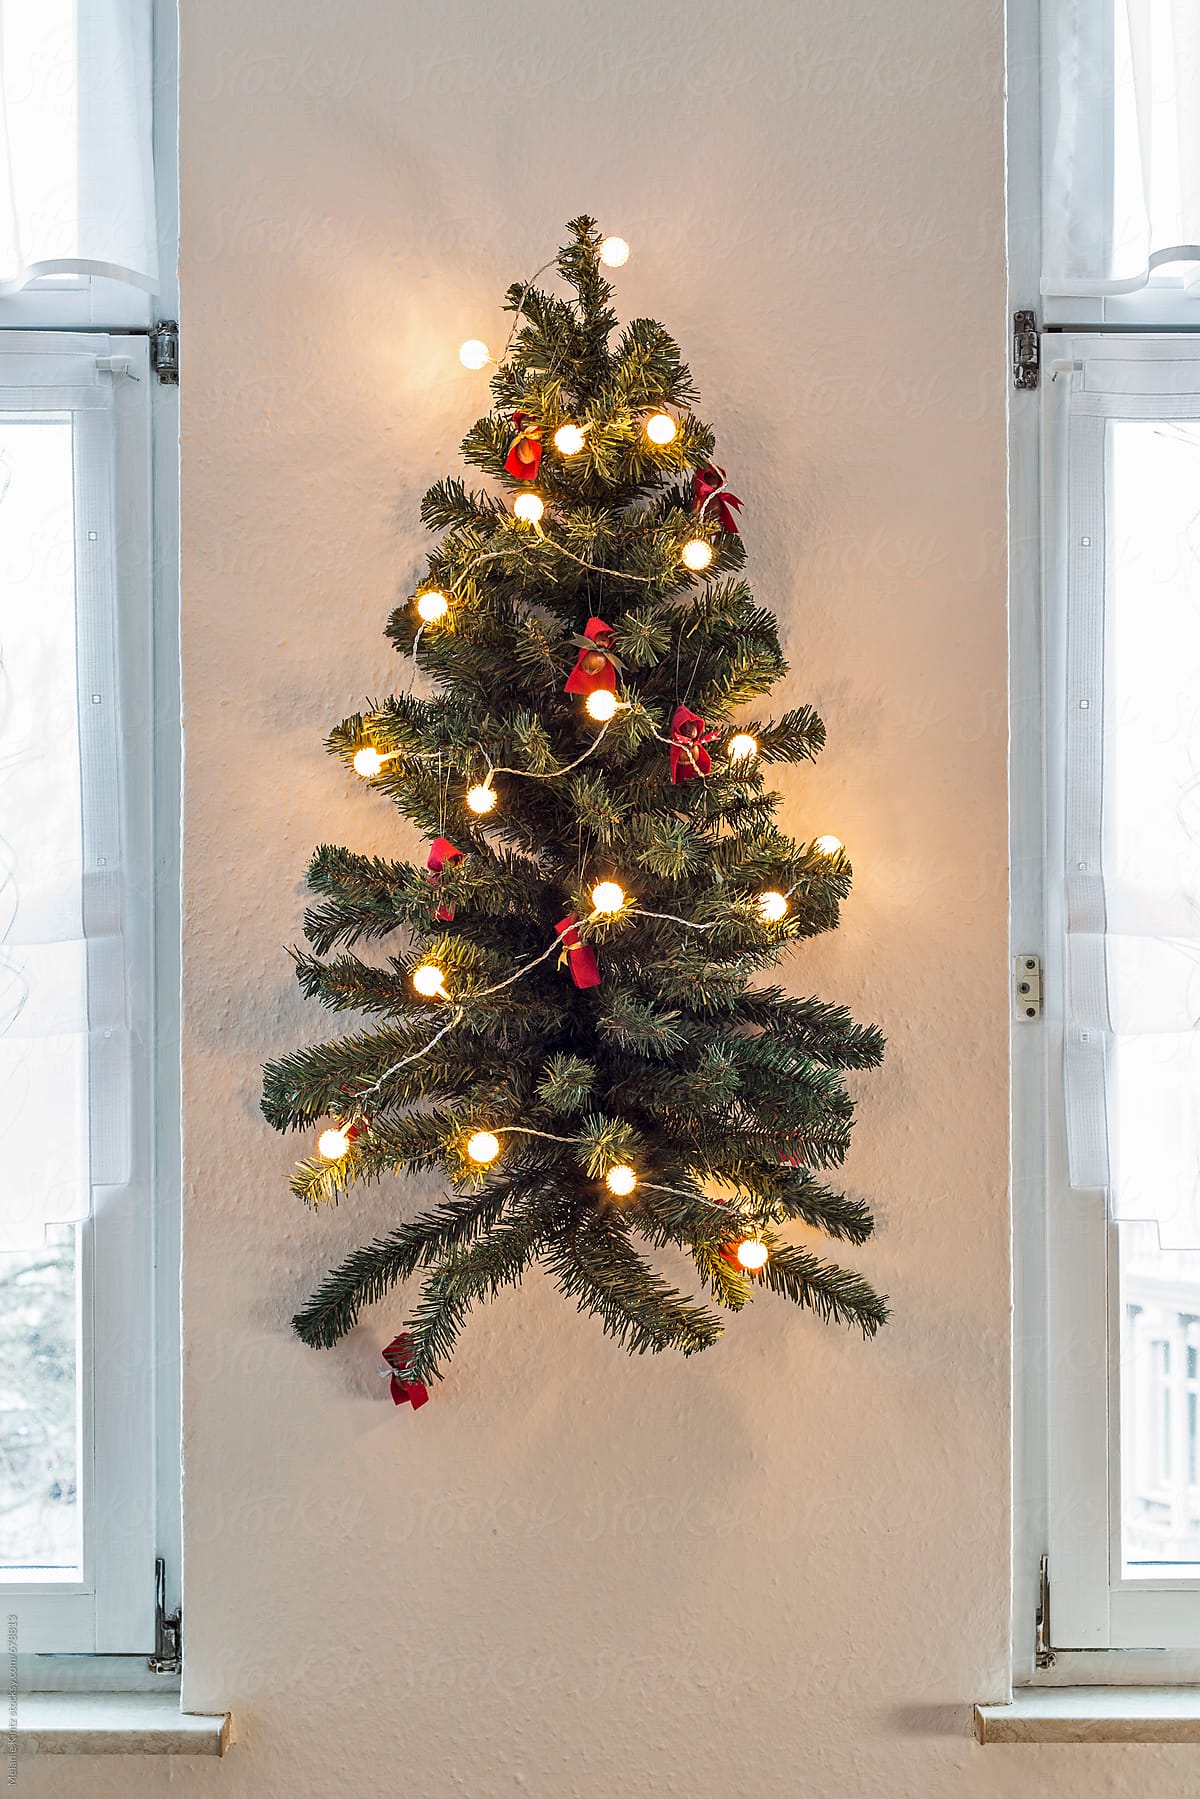 Decorated artificial Christmas tree hangs on a wall between two windows